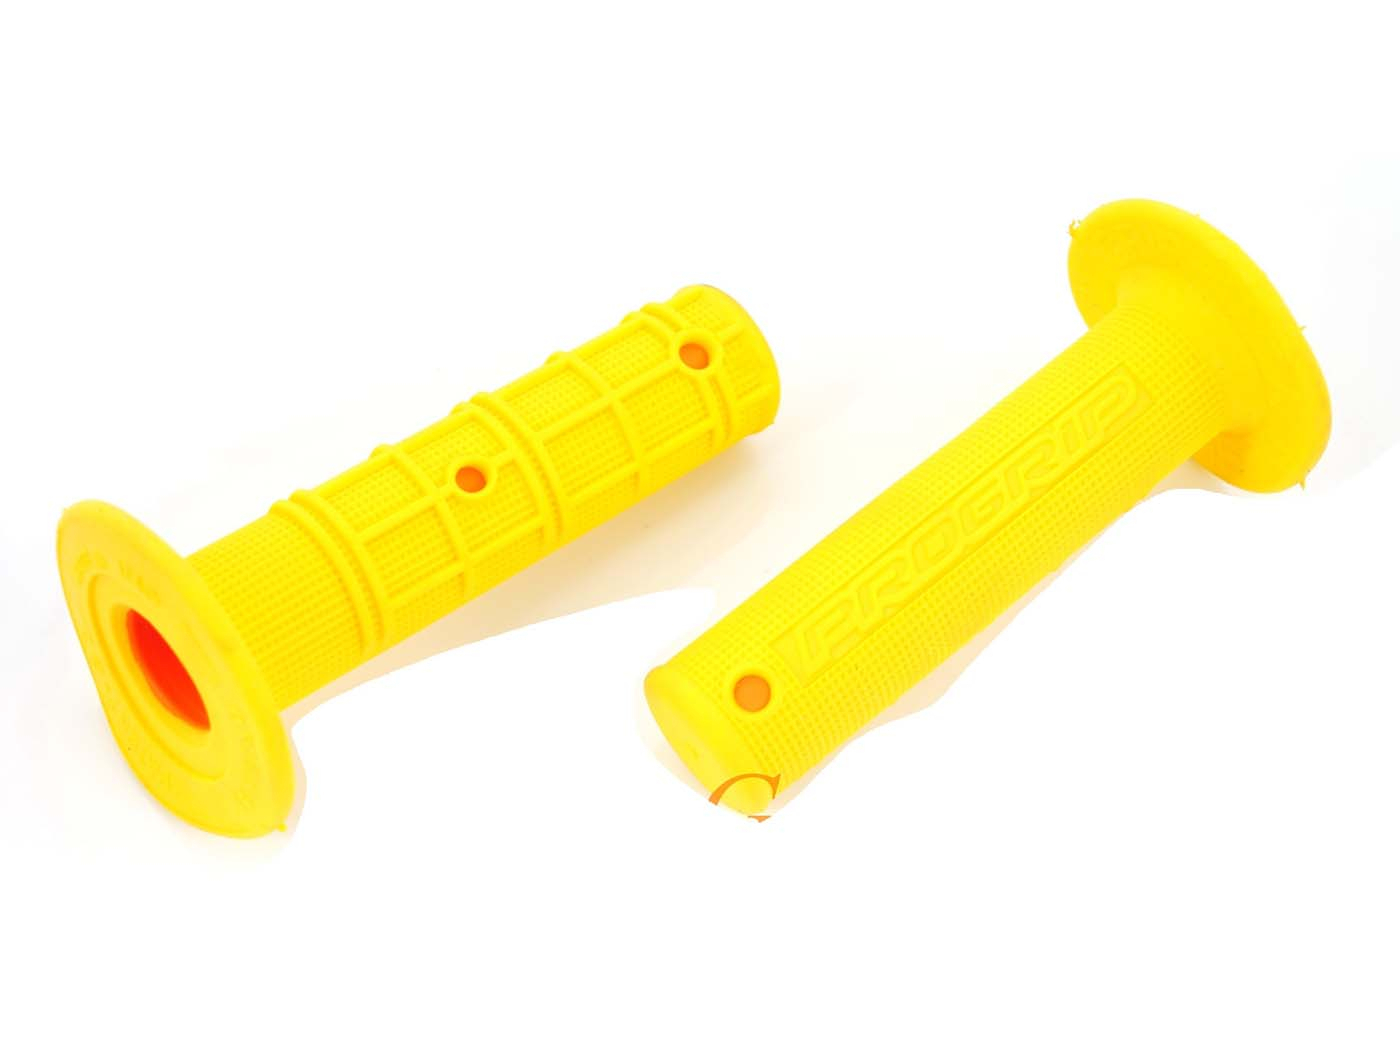 Grips Throttle/Fixed Grip Gel Grip Yellow For Moped Enduro